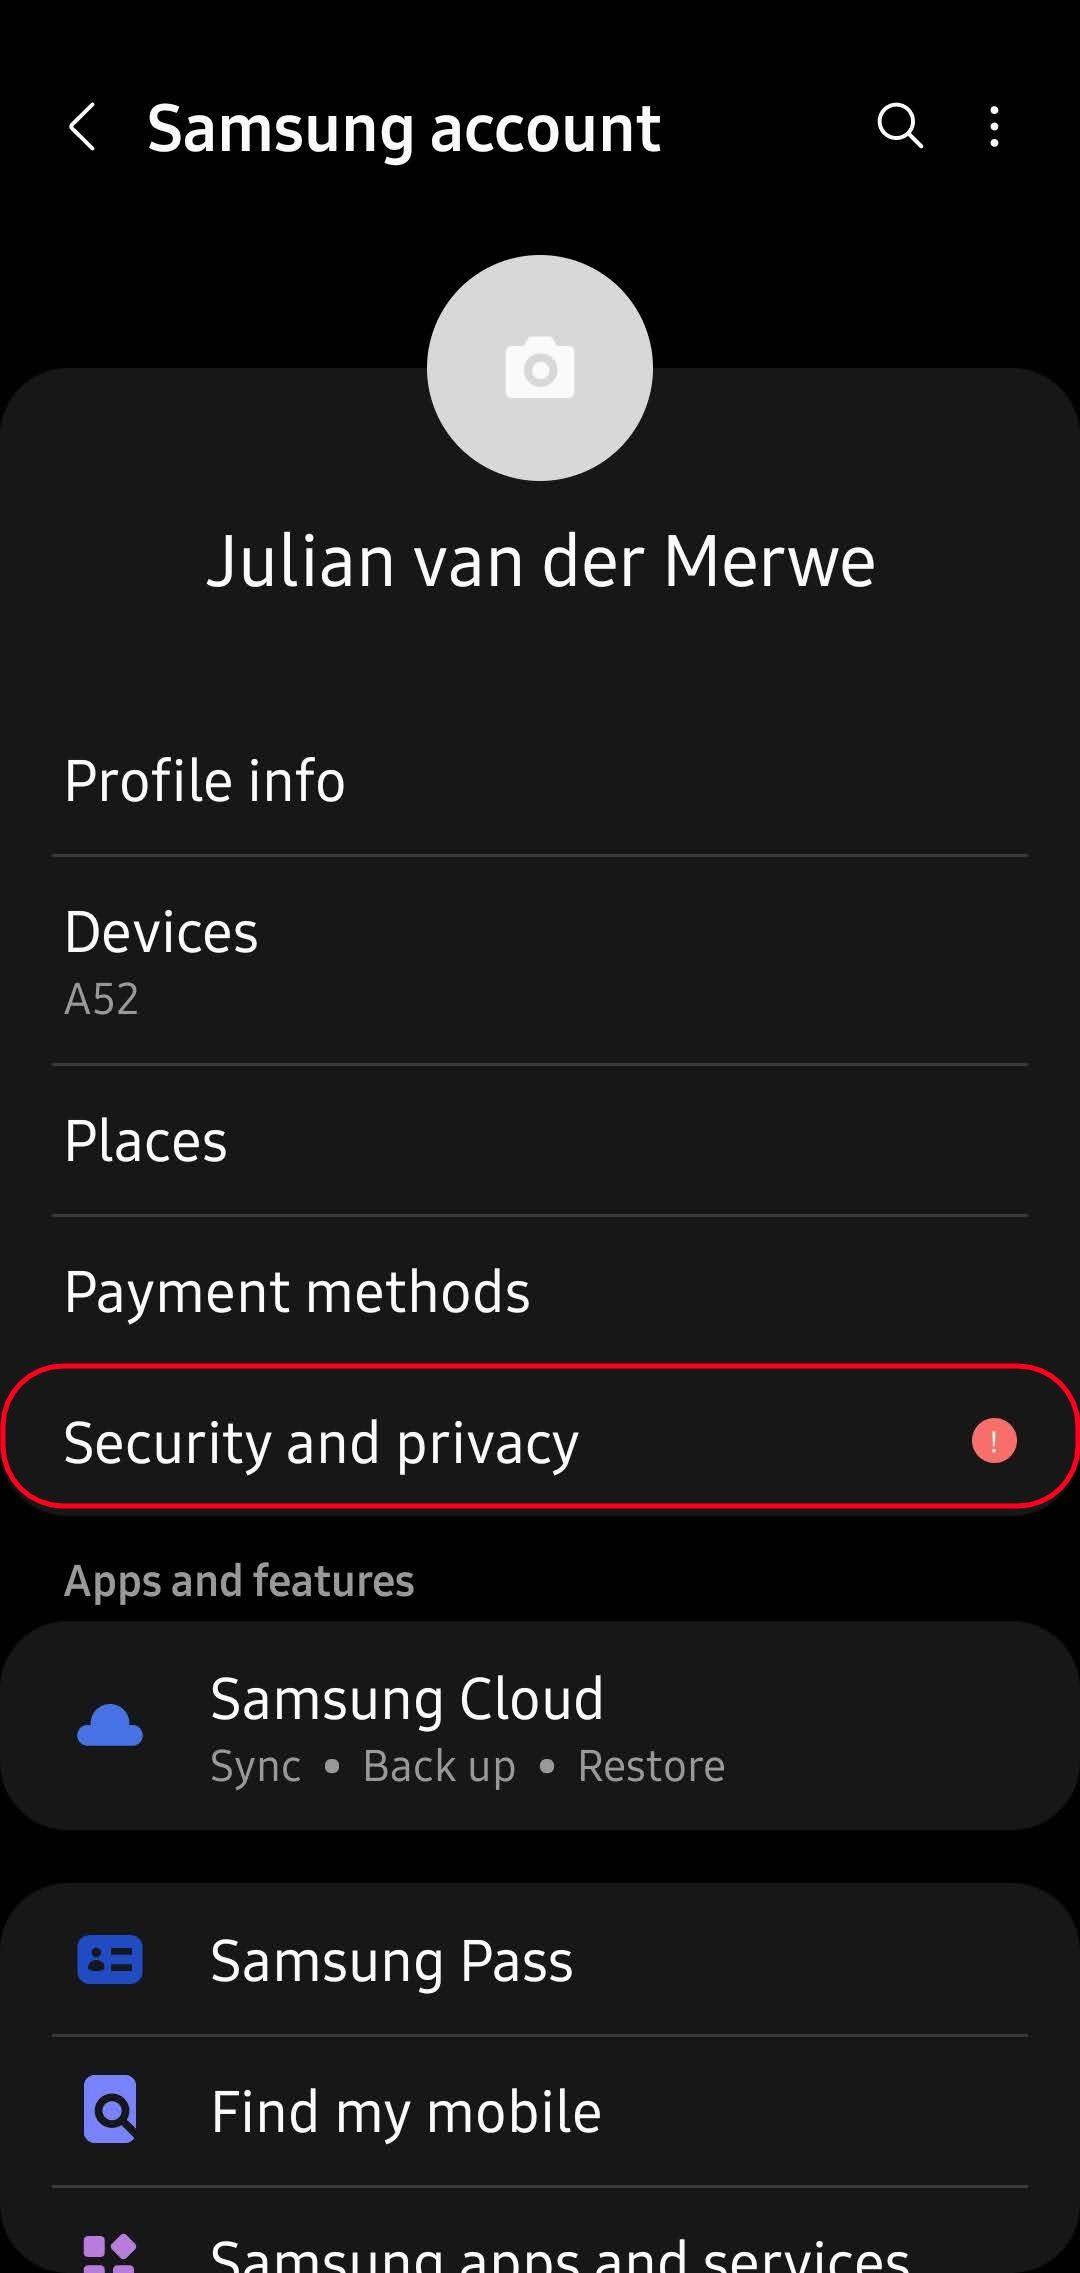 samsung account options with the security and privacy option highlighted